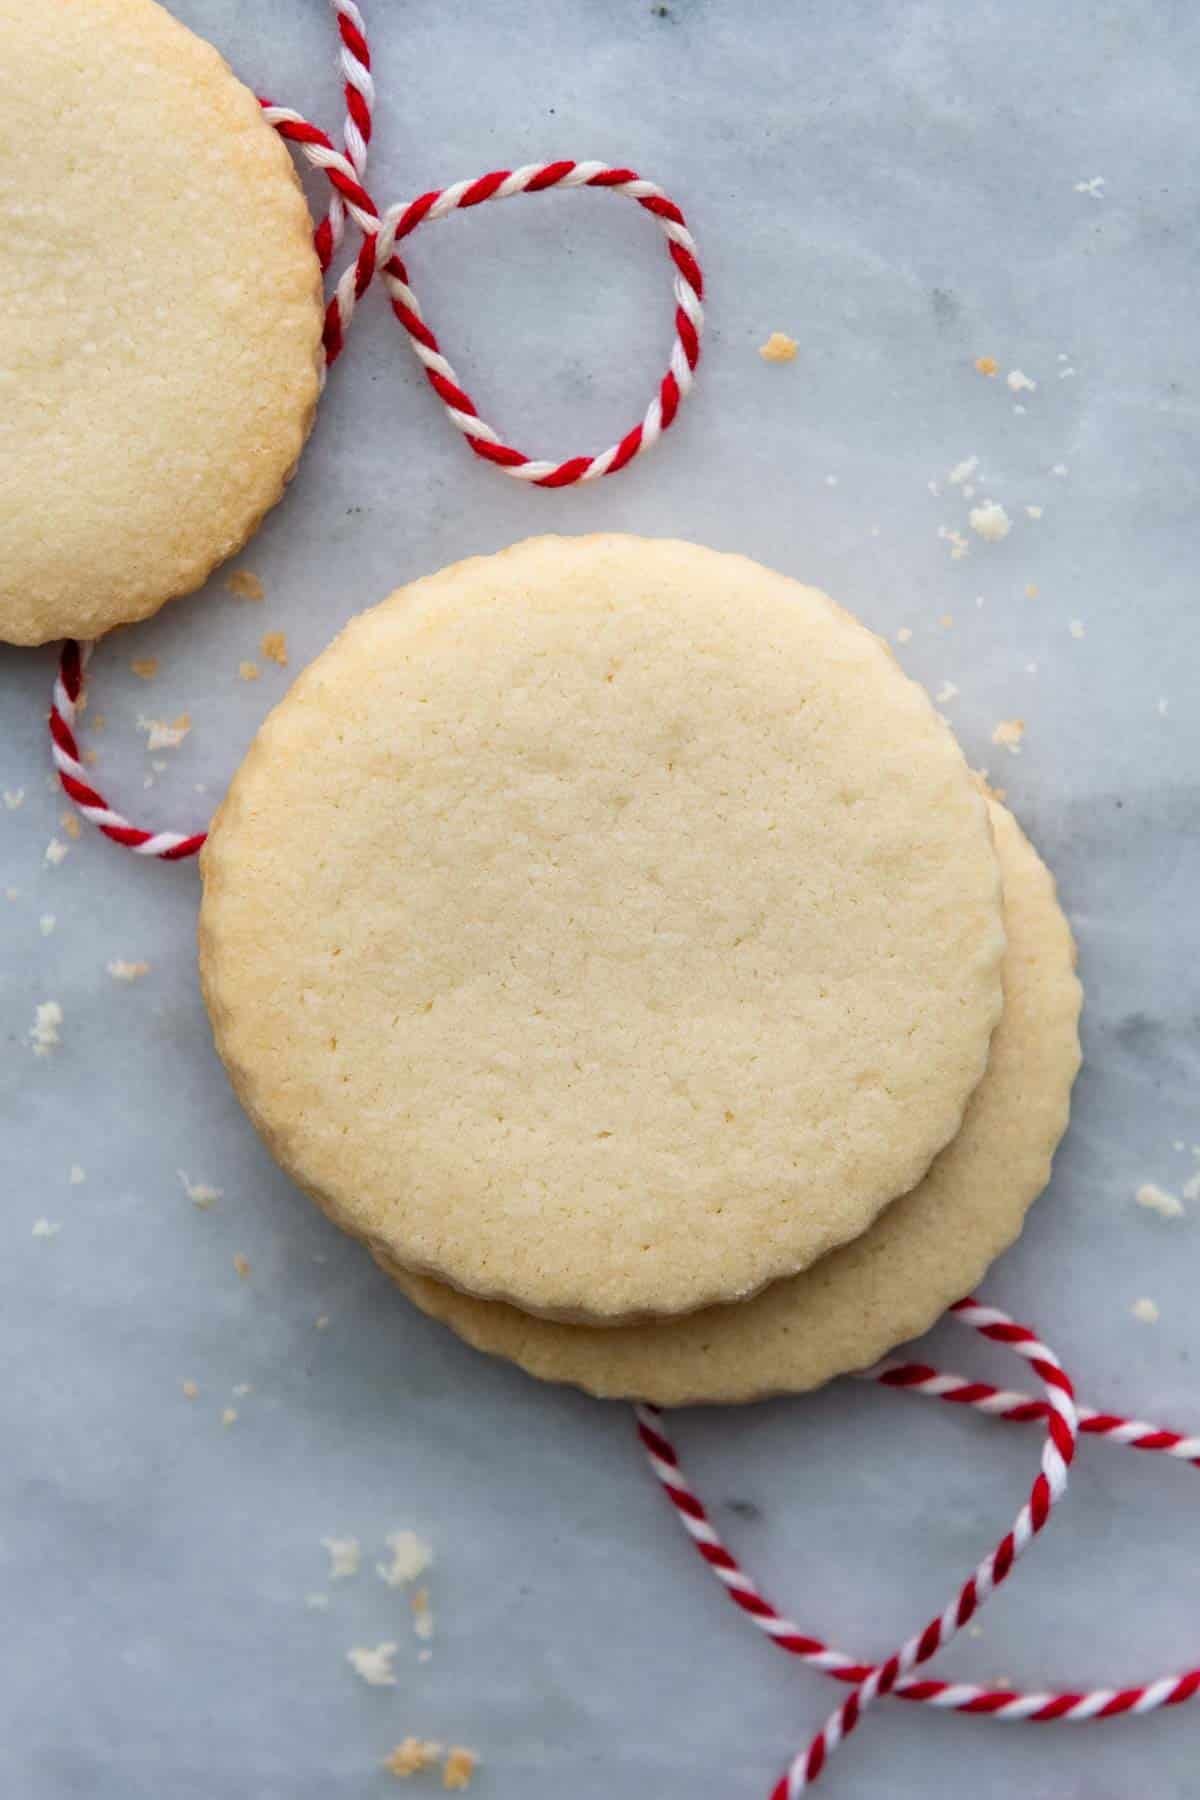 two shortbread cookies stacked with a red thread underneath.